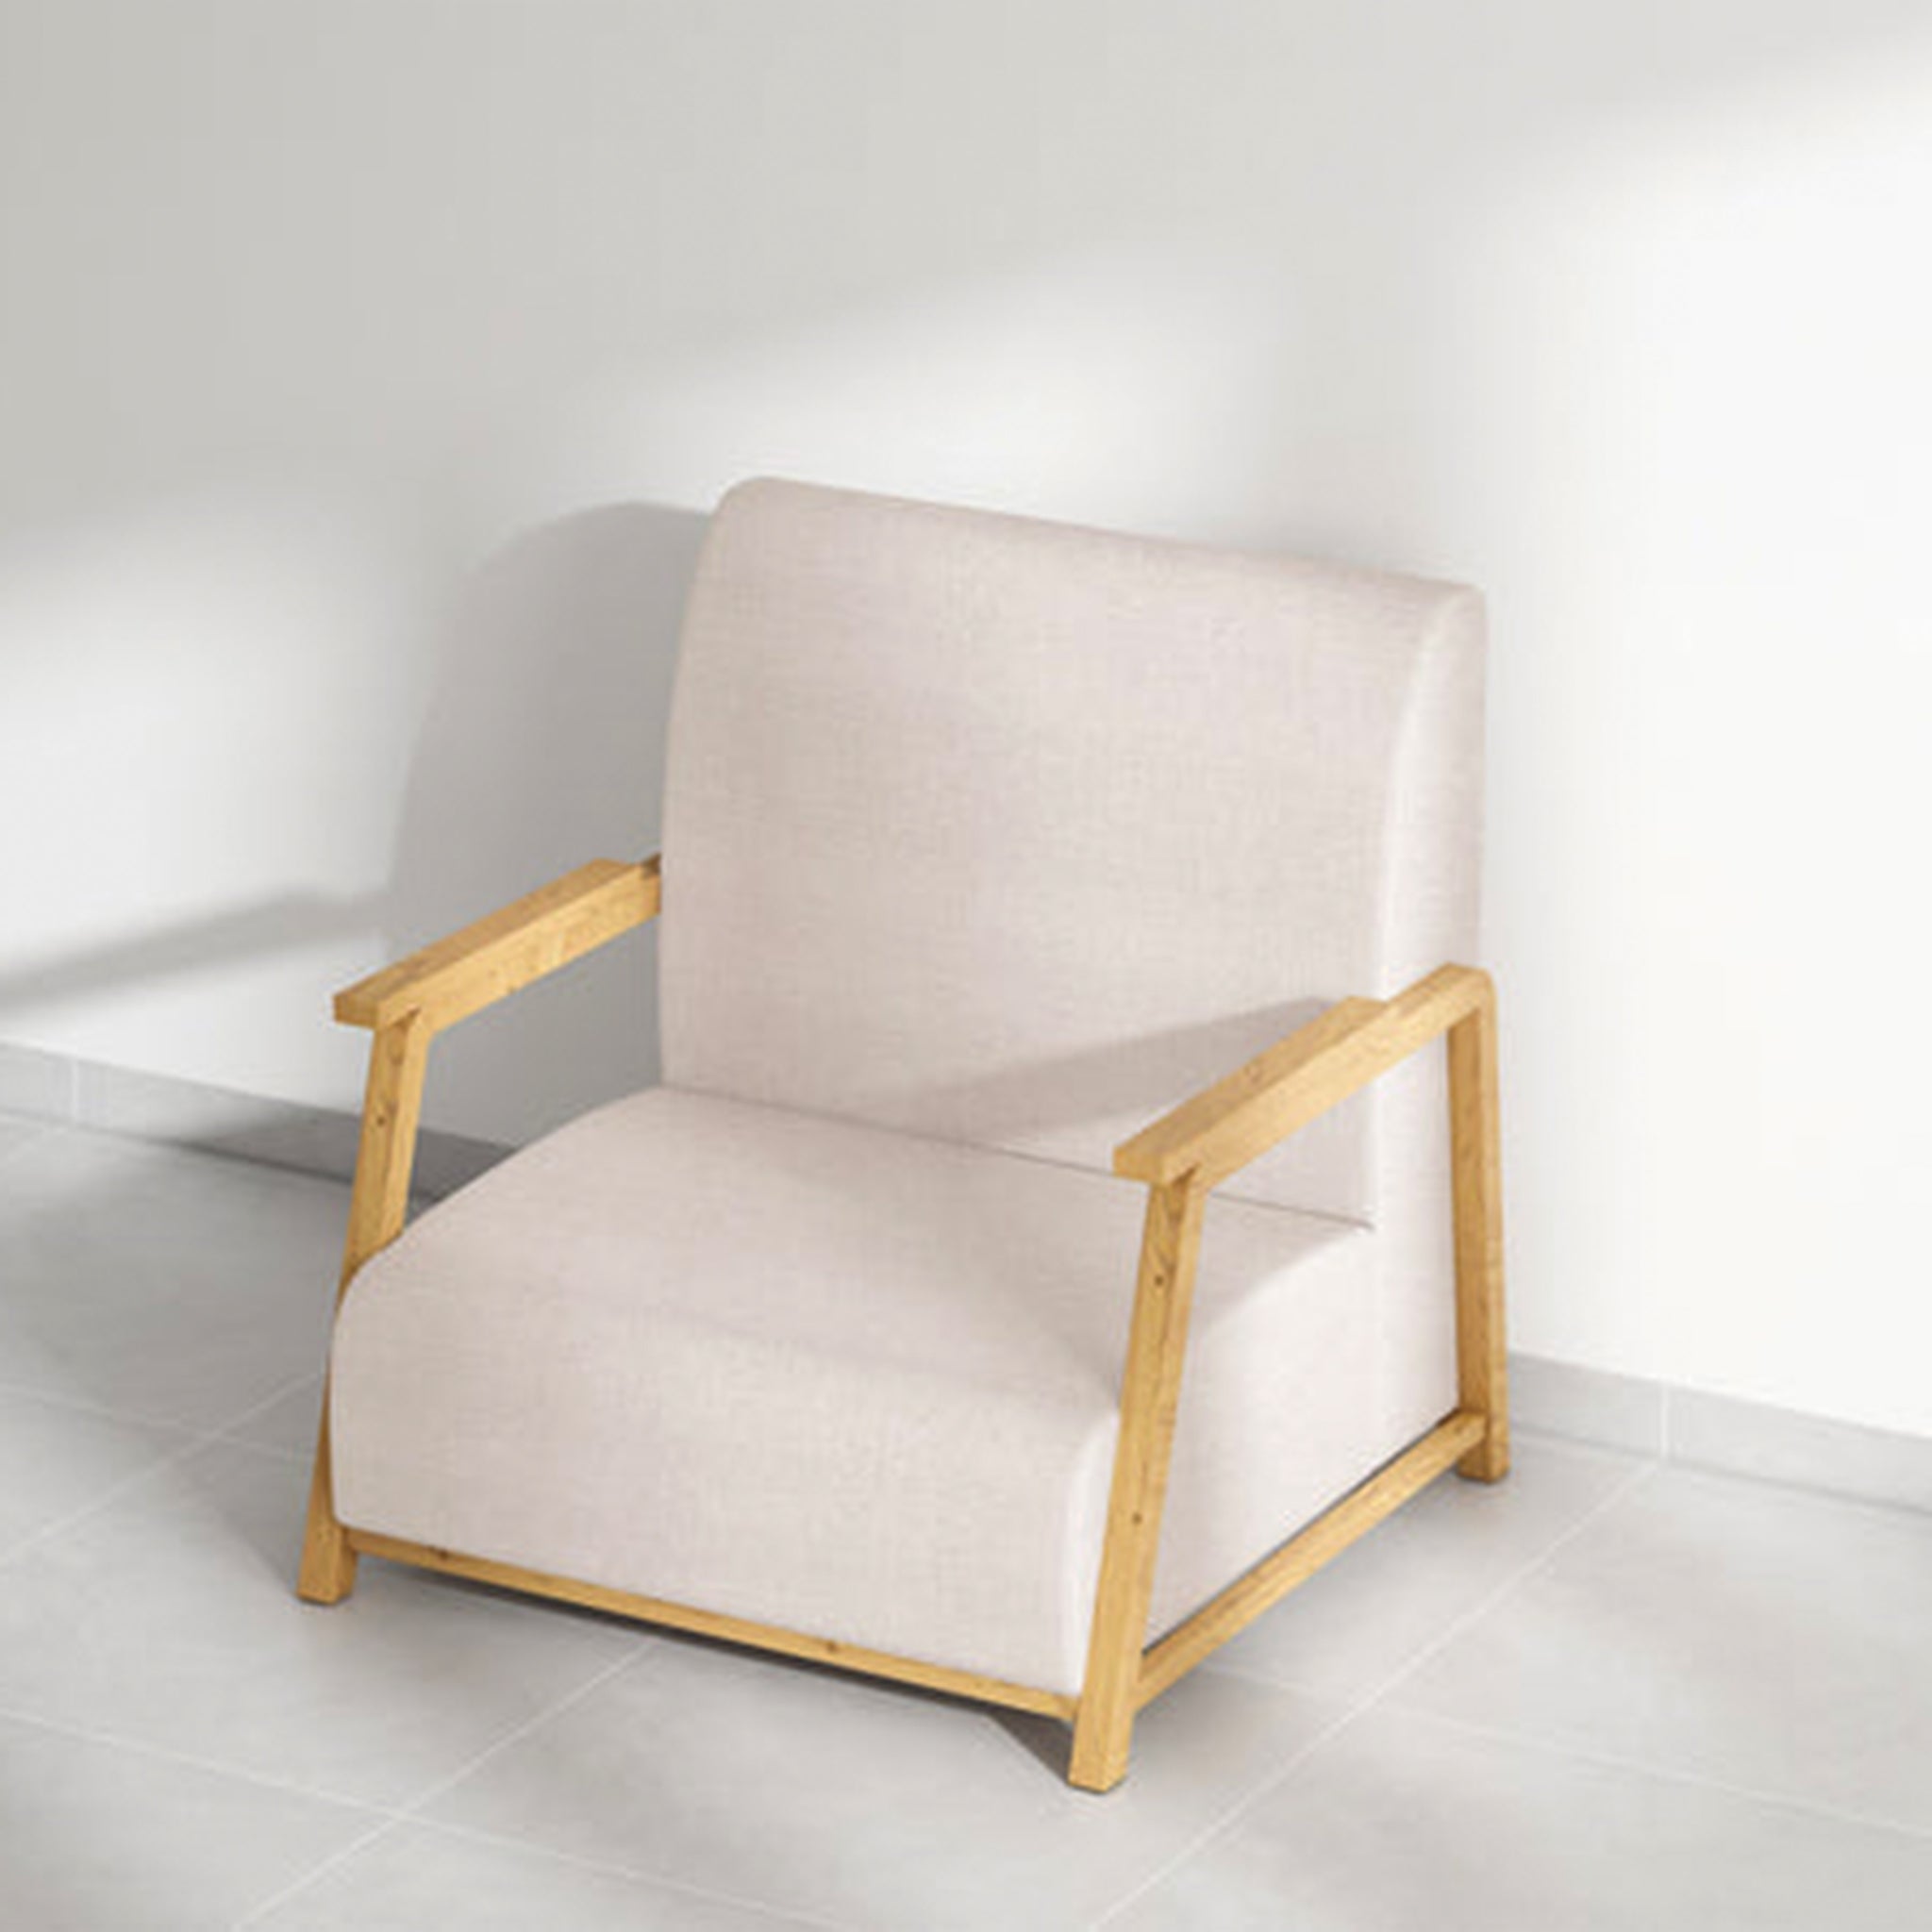 Sleek and minimalist Dixon Arm Accent Chair in a light-filled space.